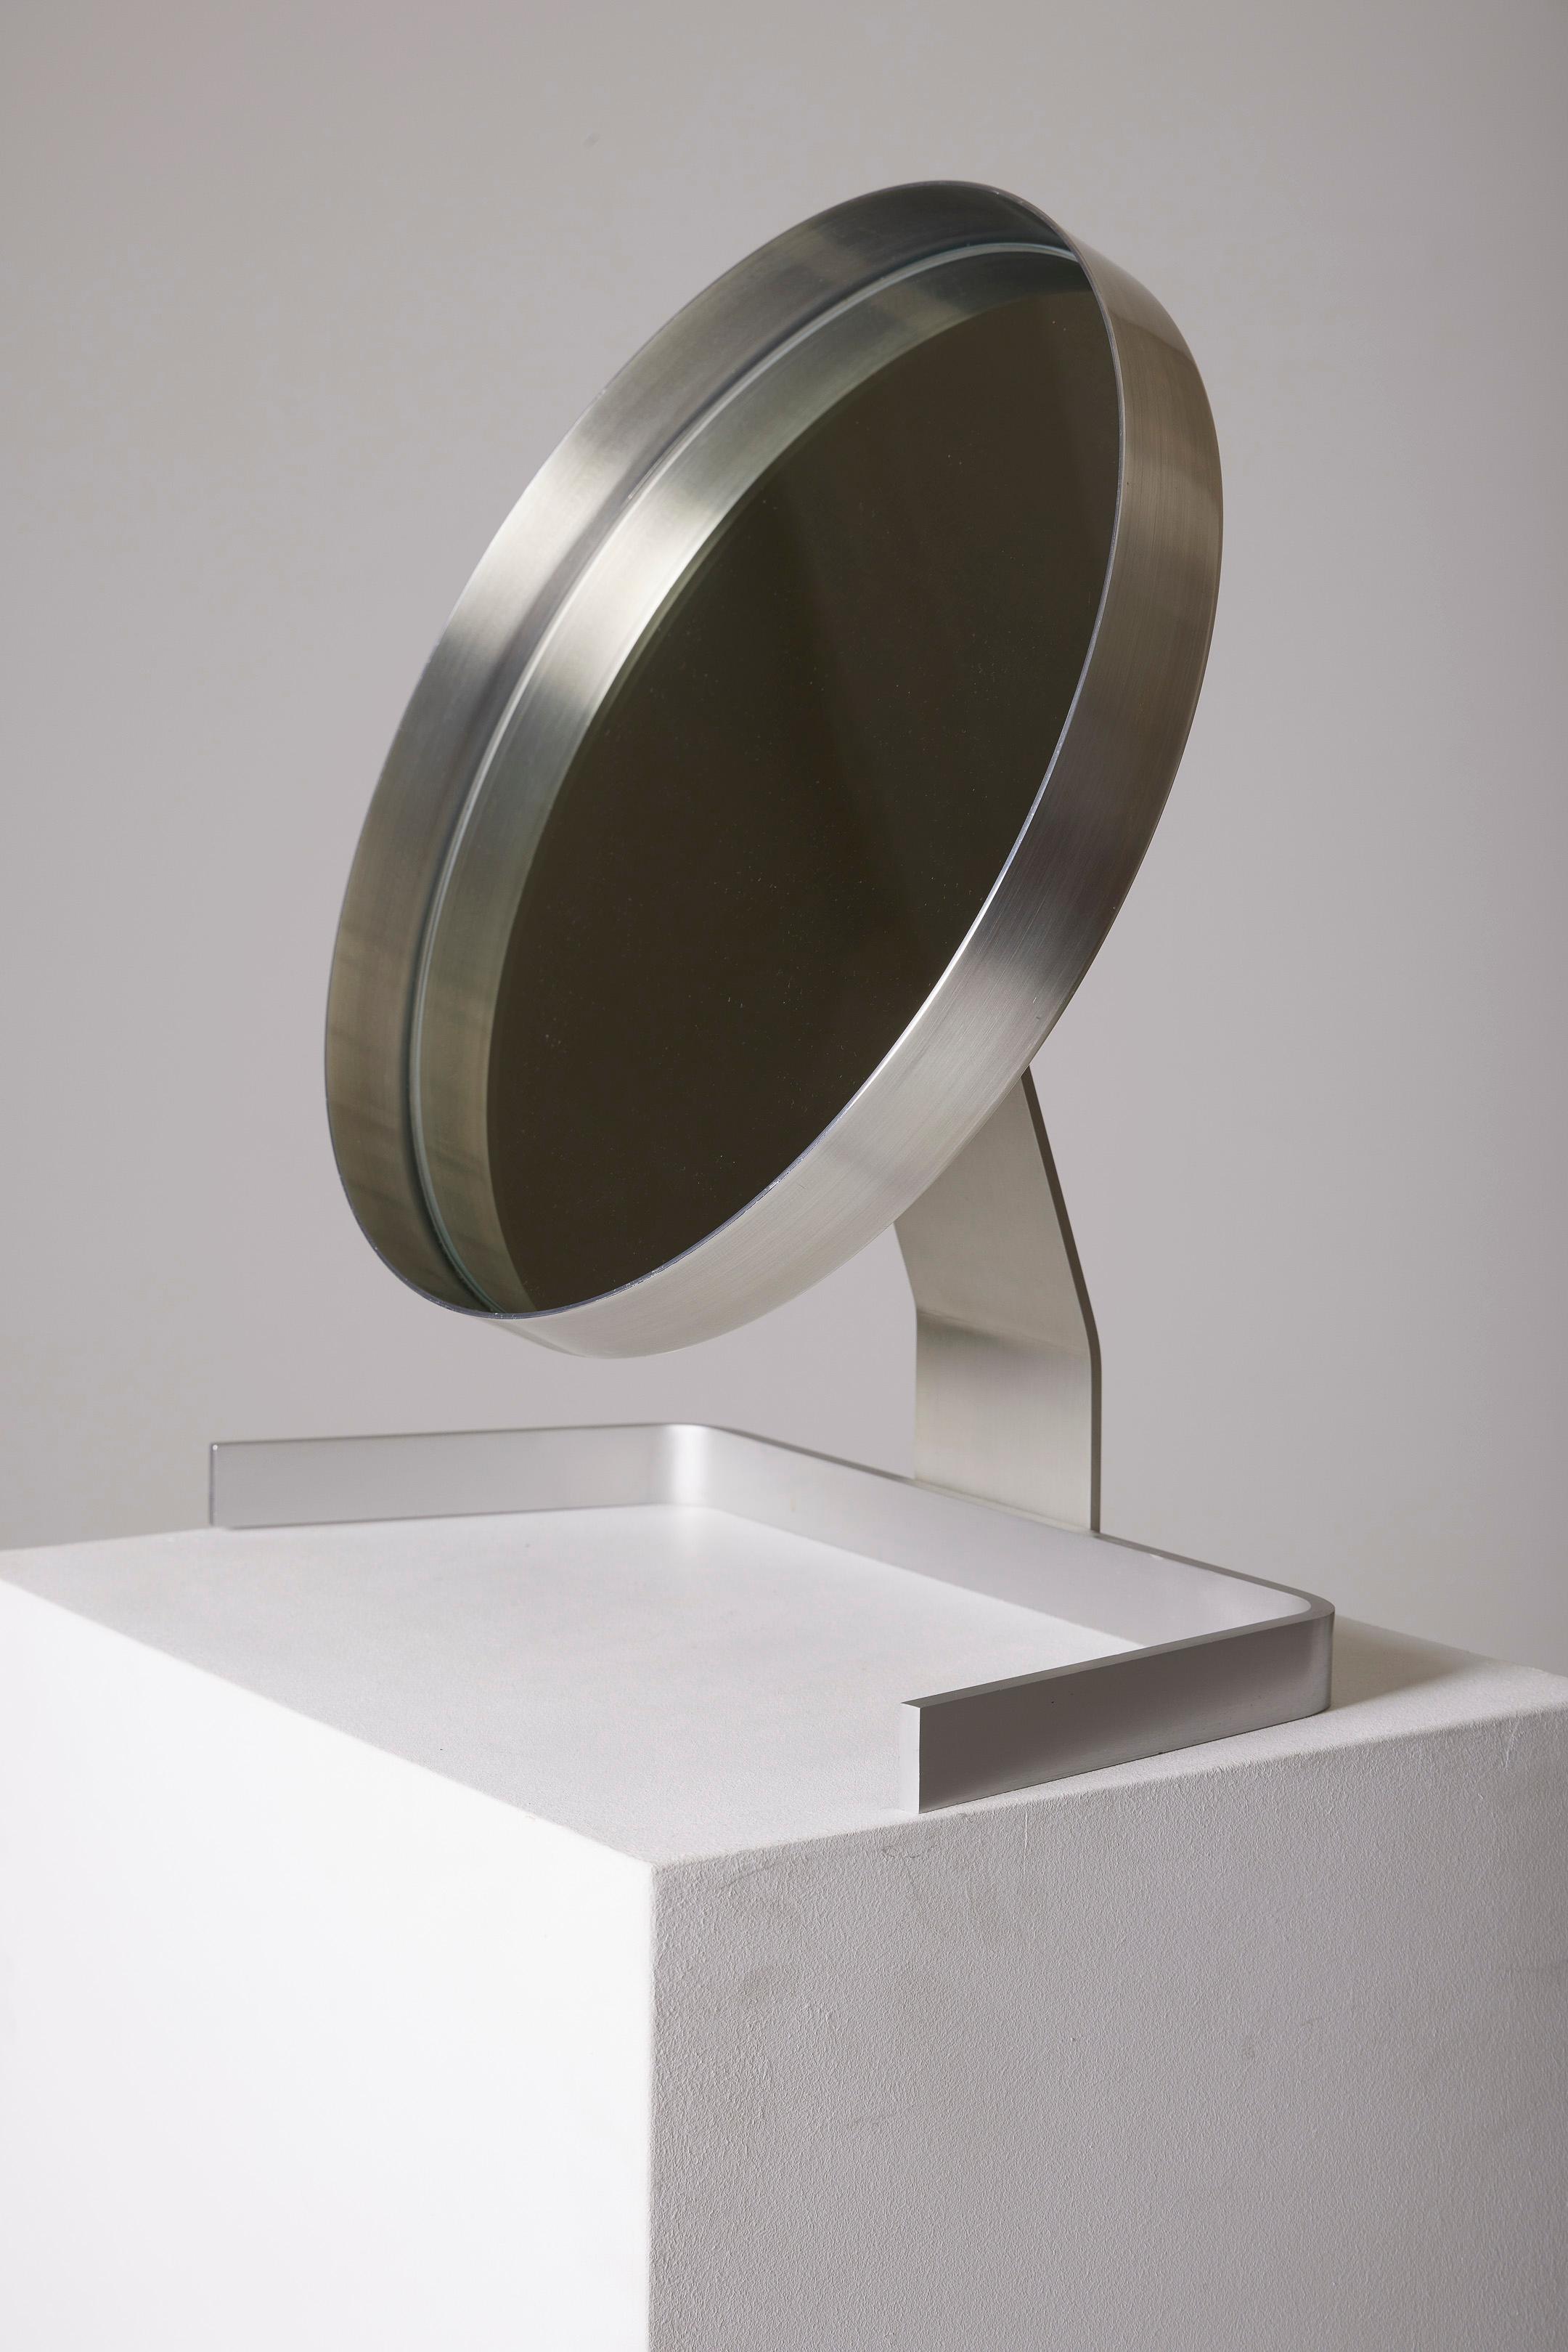 Round brushed aluminum tabletop mirror by French designer Pierre Vandel (1939-) from the 1970s. Following his collaboration with the publisher Marais International, Pierre Vandel founded his own workshop and had a decisive encounter with the famous